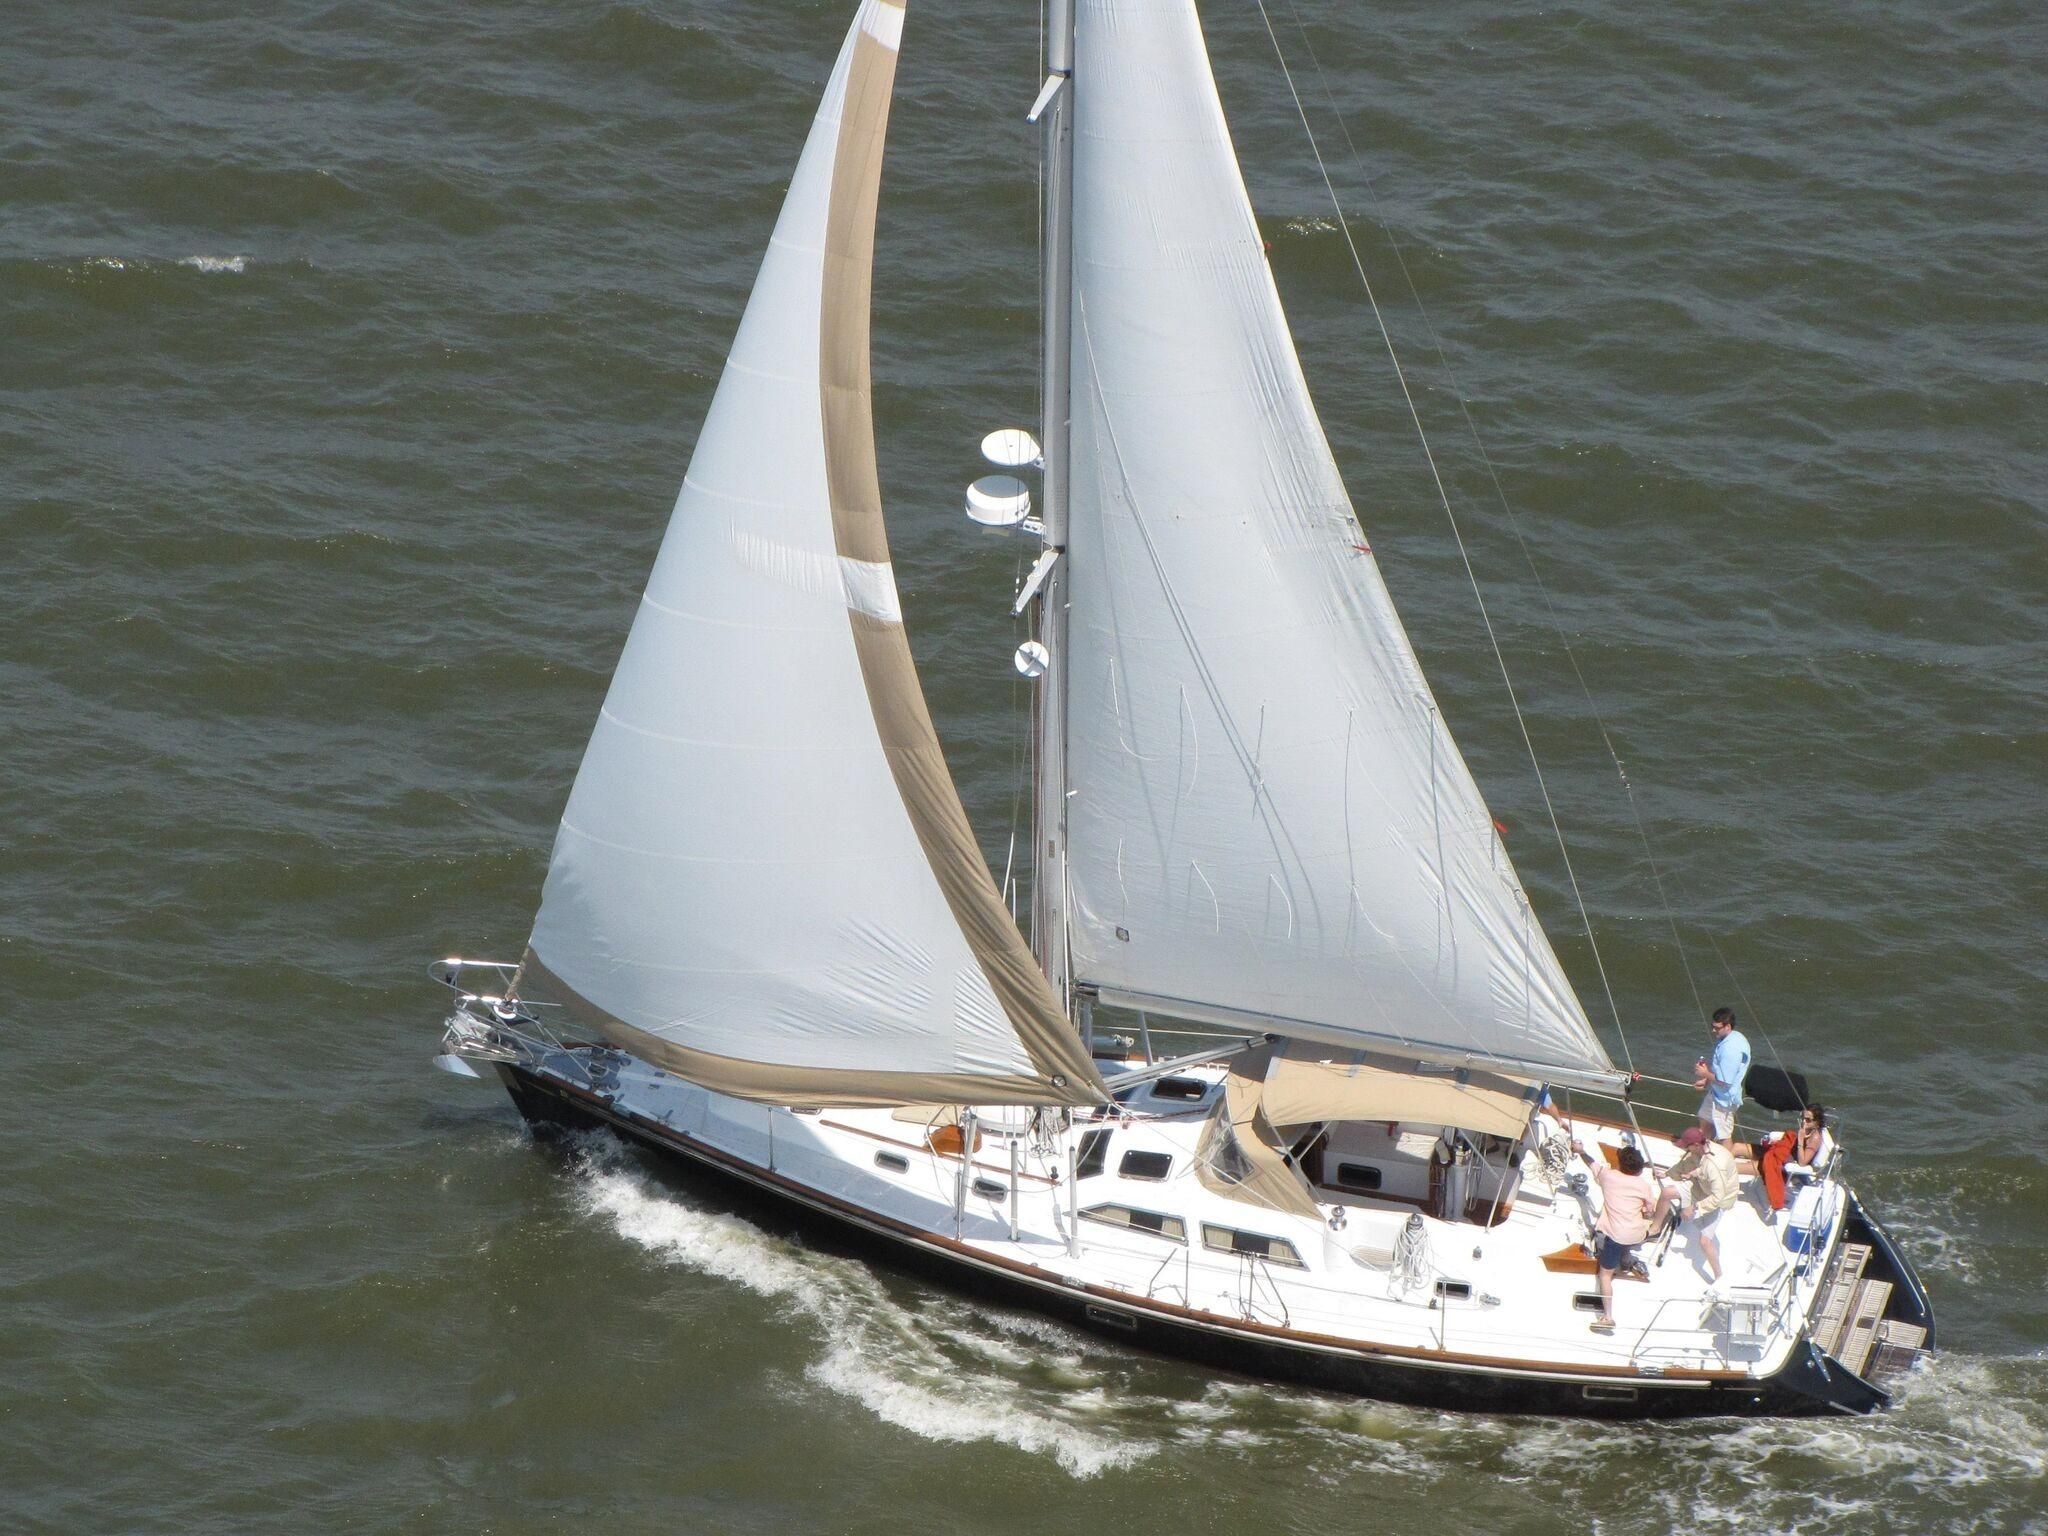 46 ft sailboat for sale